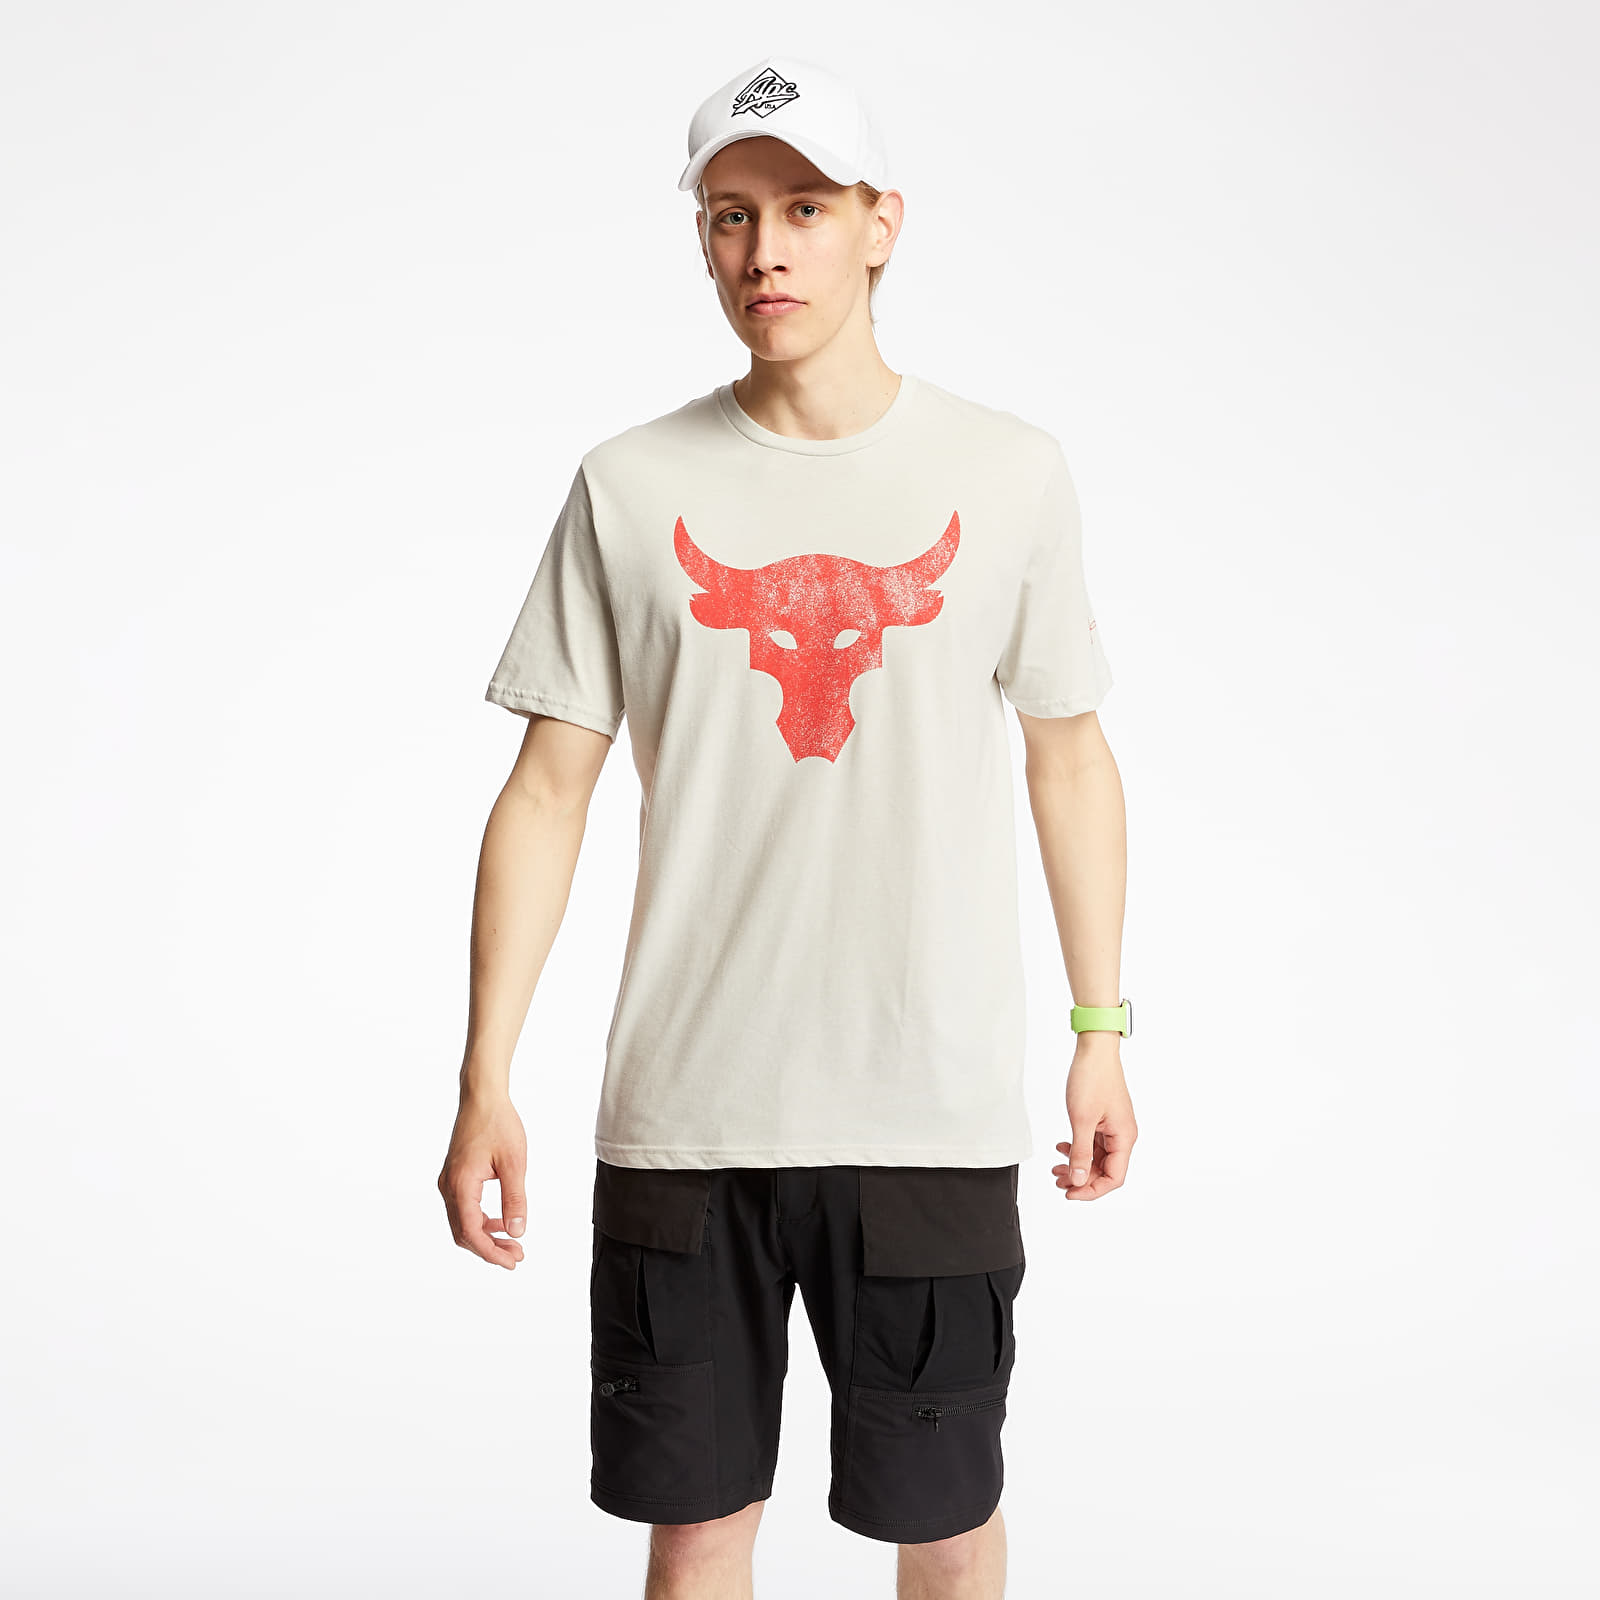 T-shirts Under Armour Project Rock Brahma Bull Tee Summit White/ Versa Red